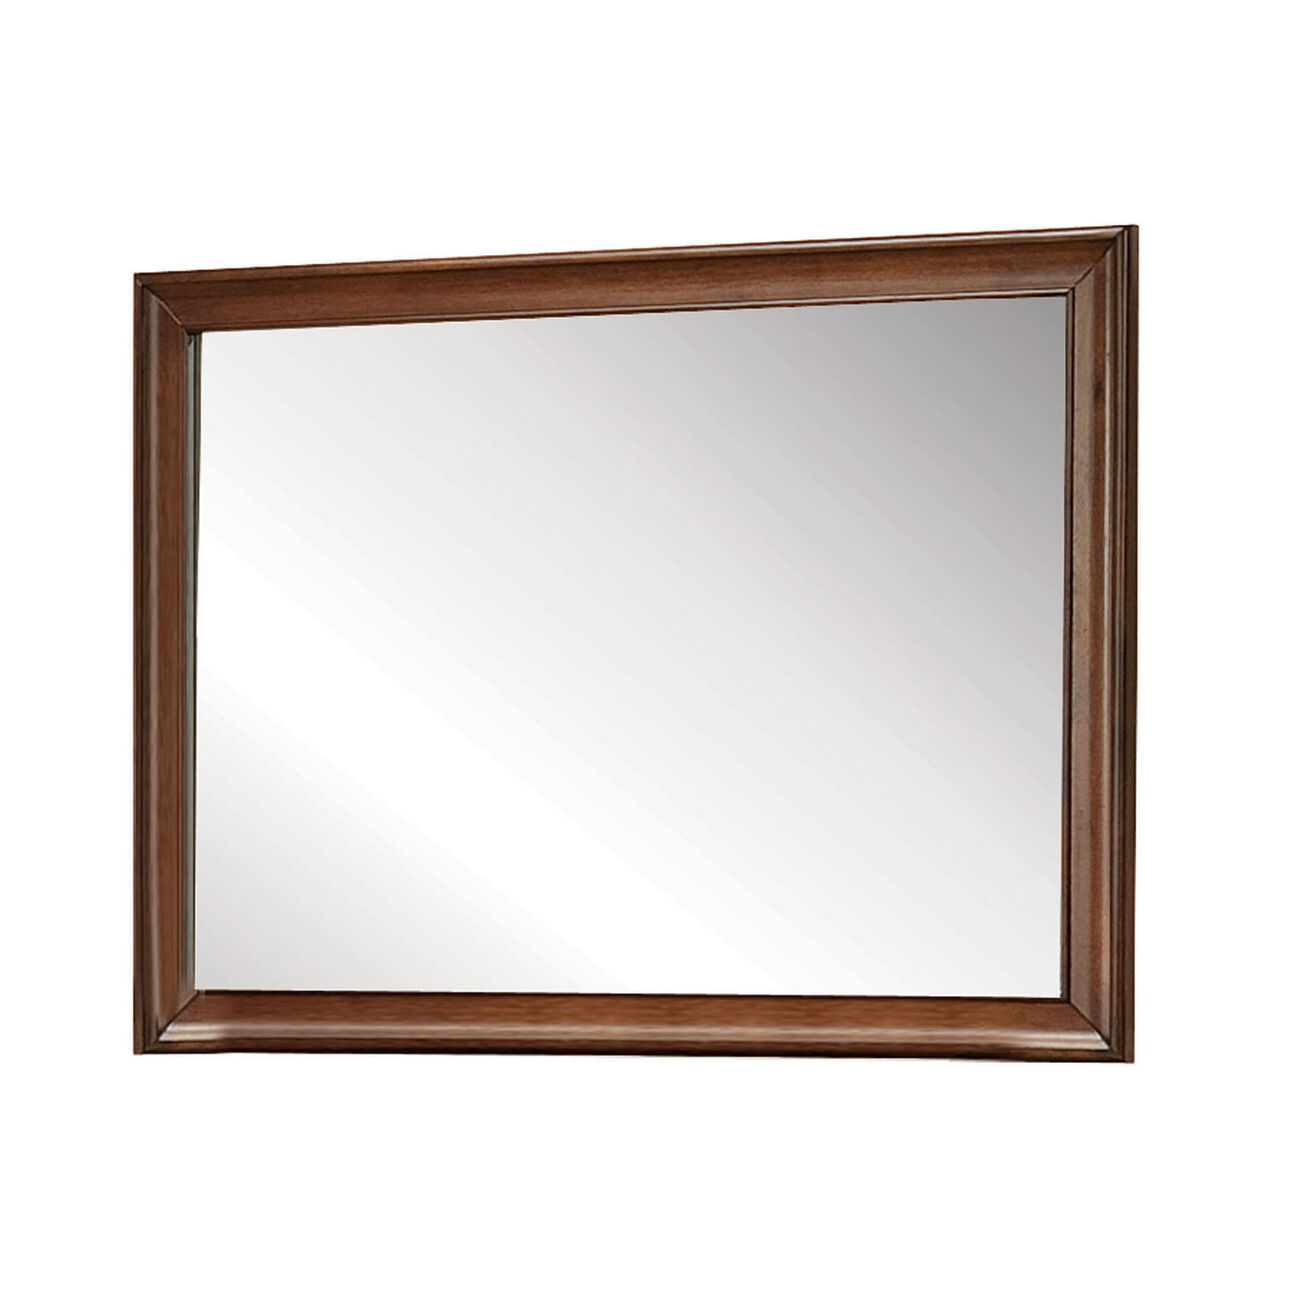 Transitional Style Wooden Mirror with Beveled Edge, Brown and Silver